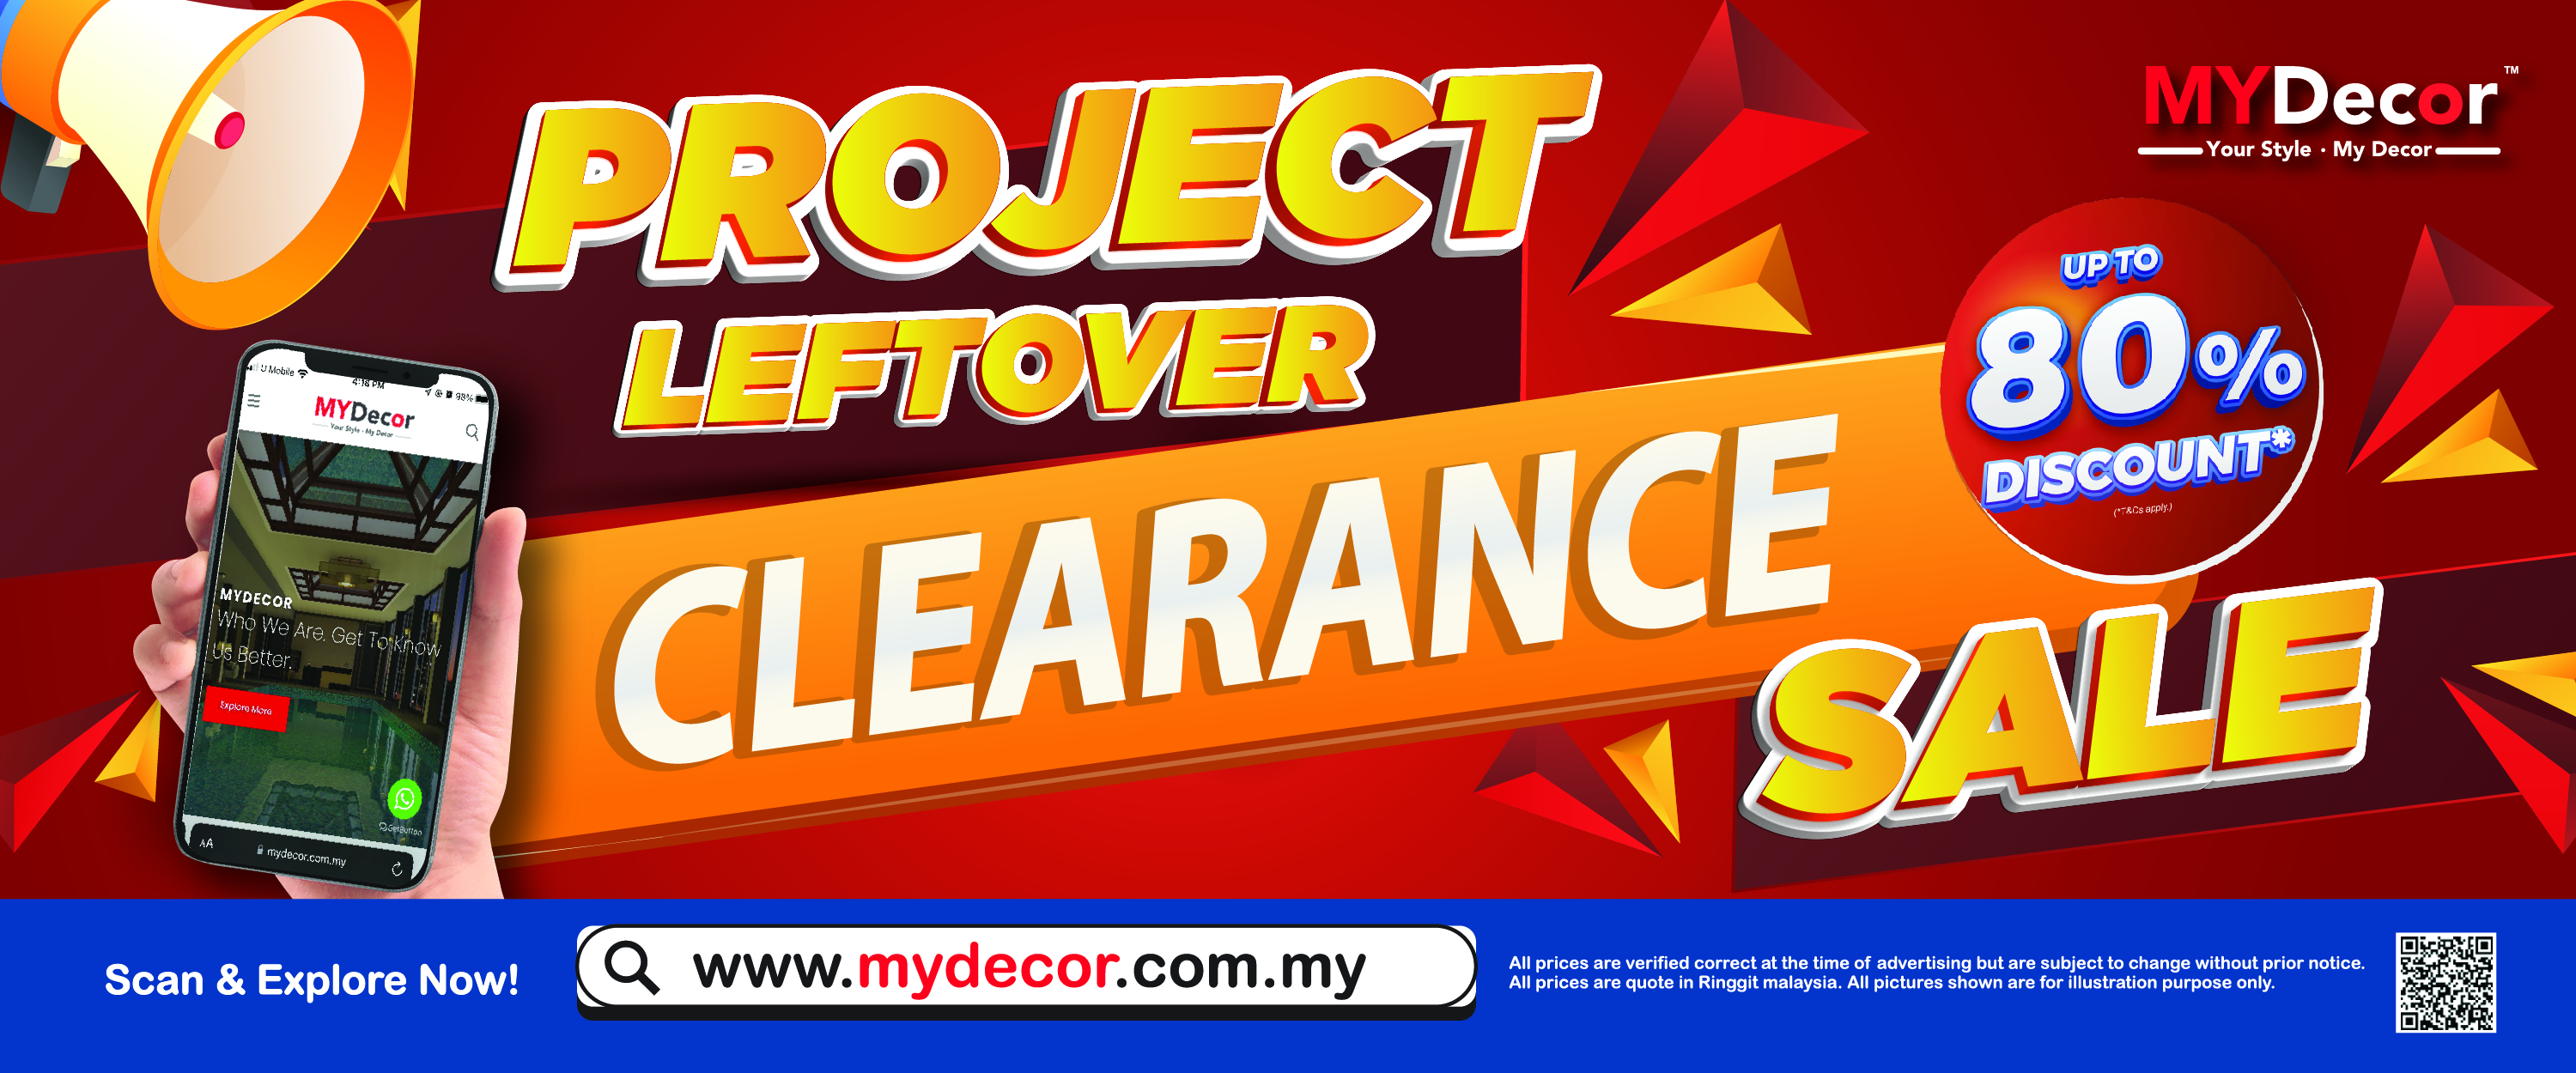 Project LeftOver Clearance Sales